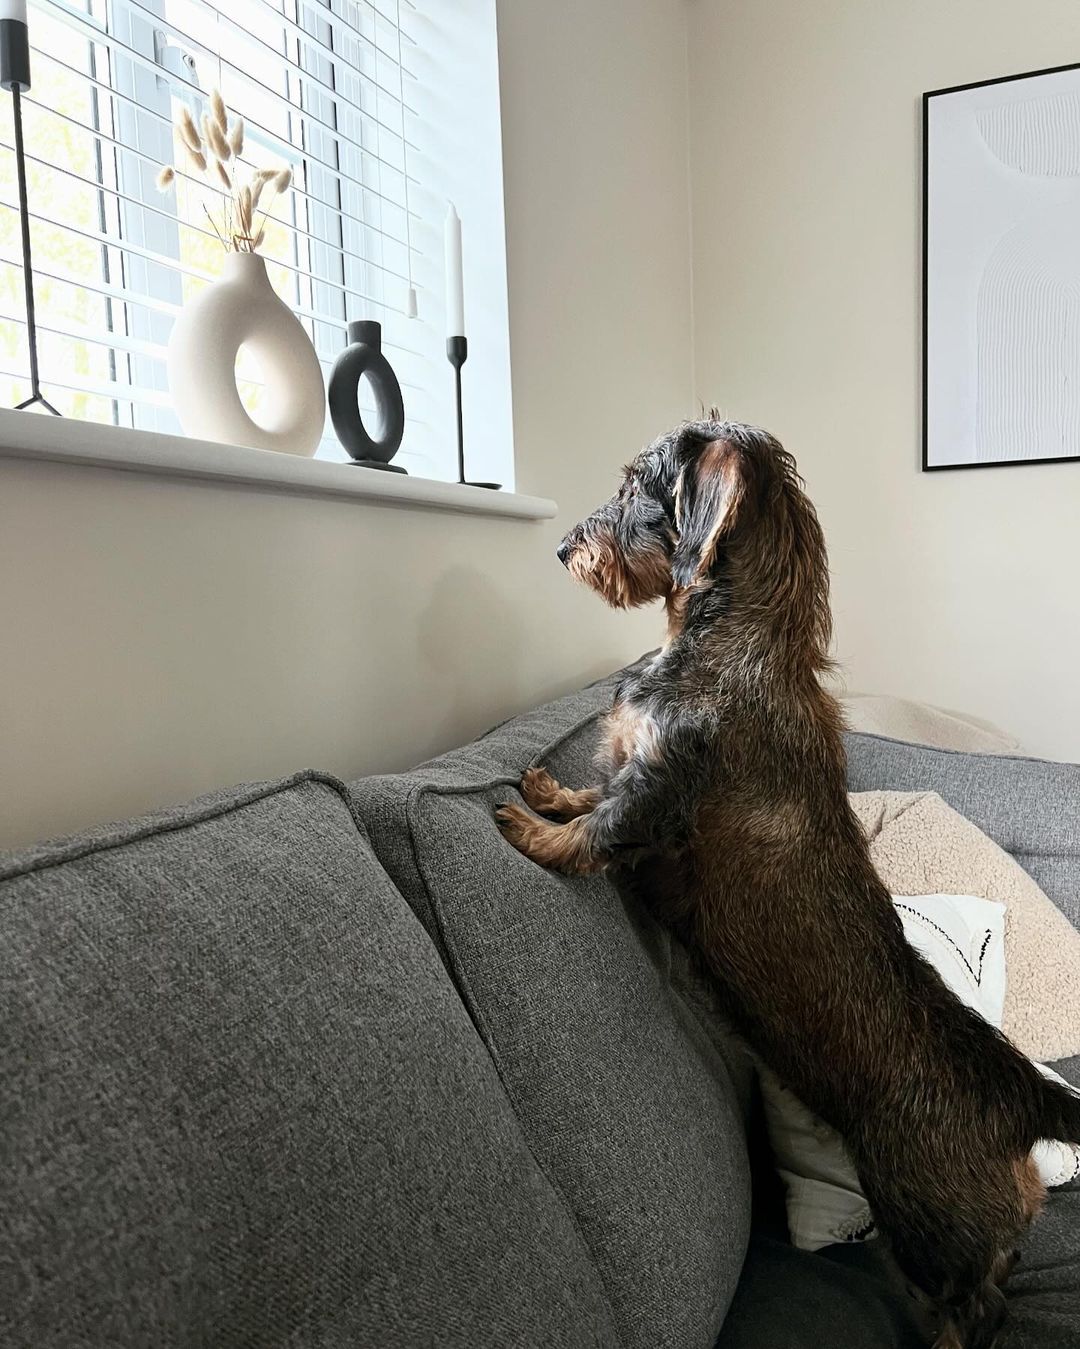 dachshund standing up on the couch and looking out of the window